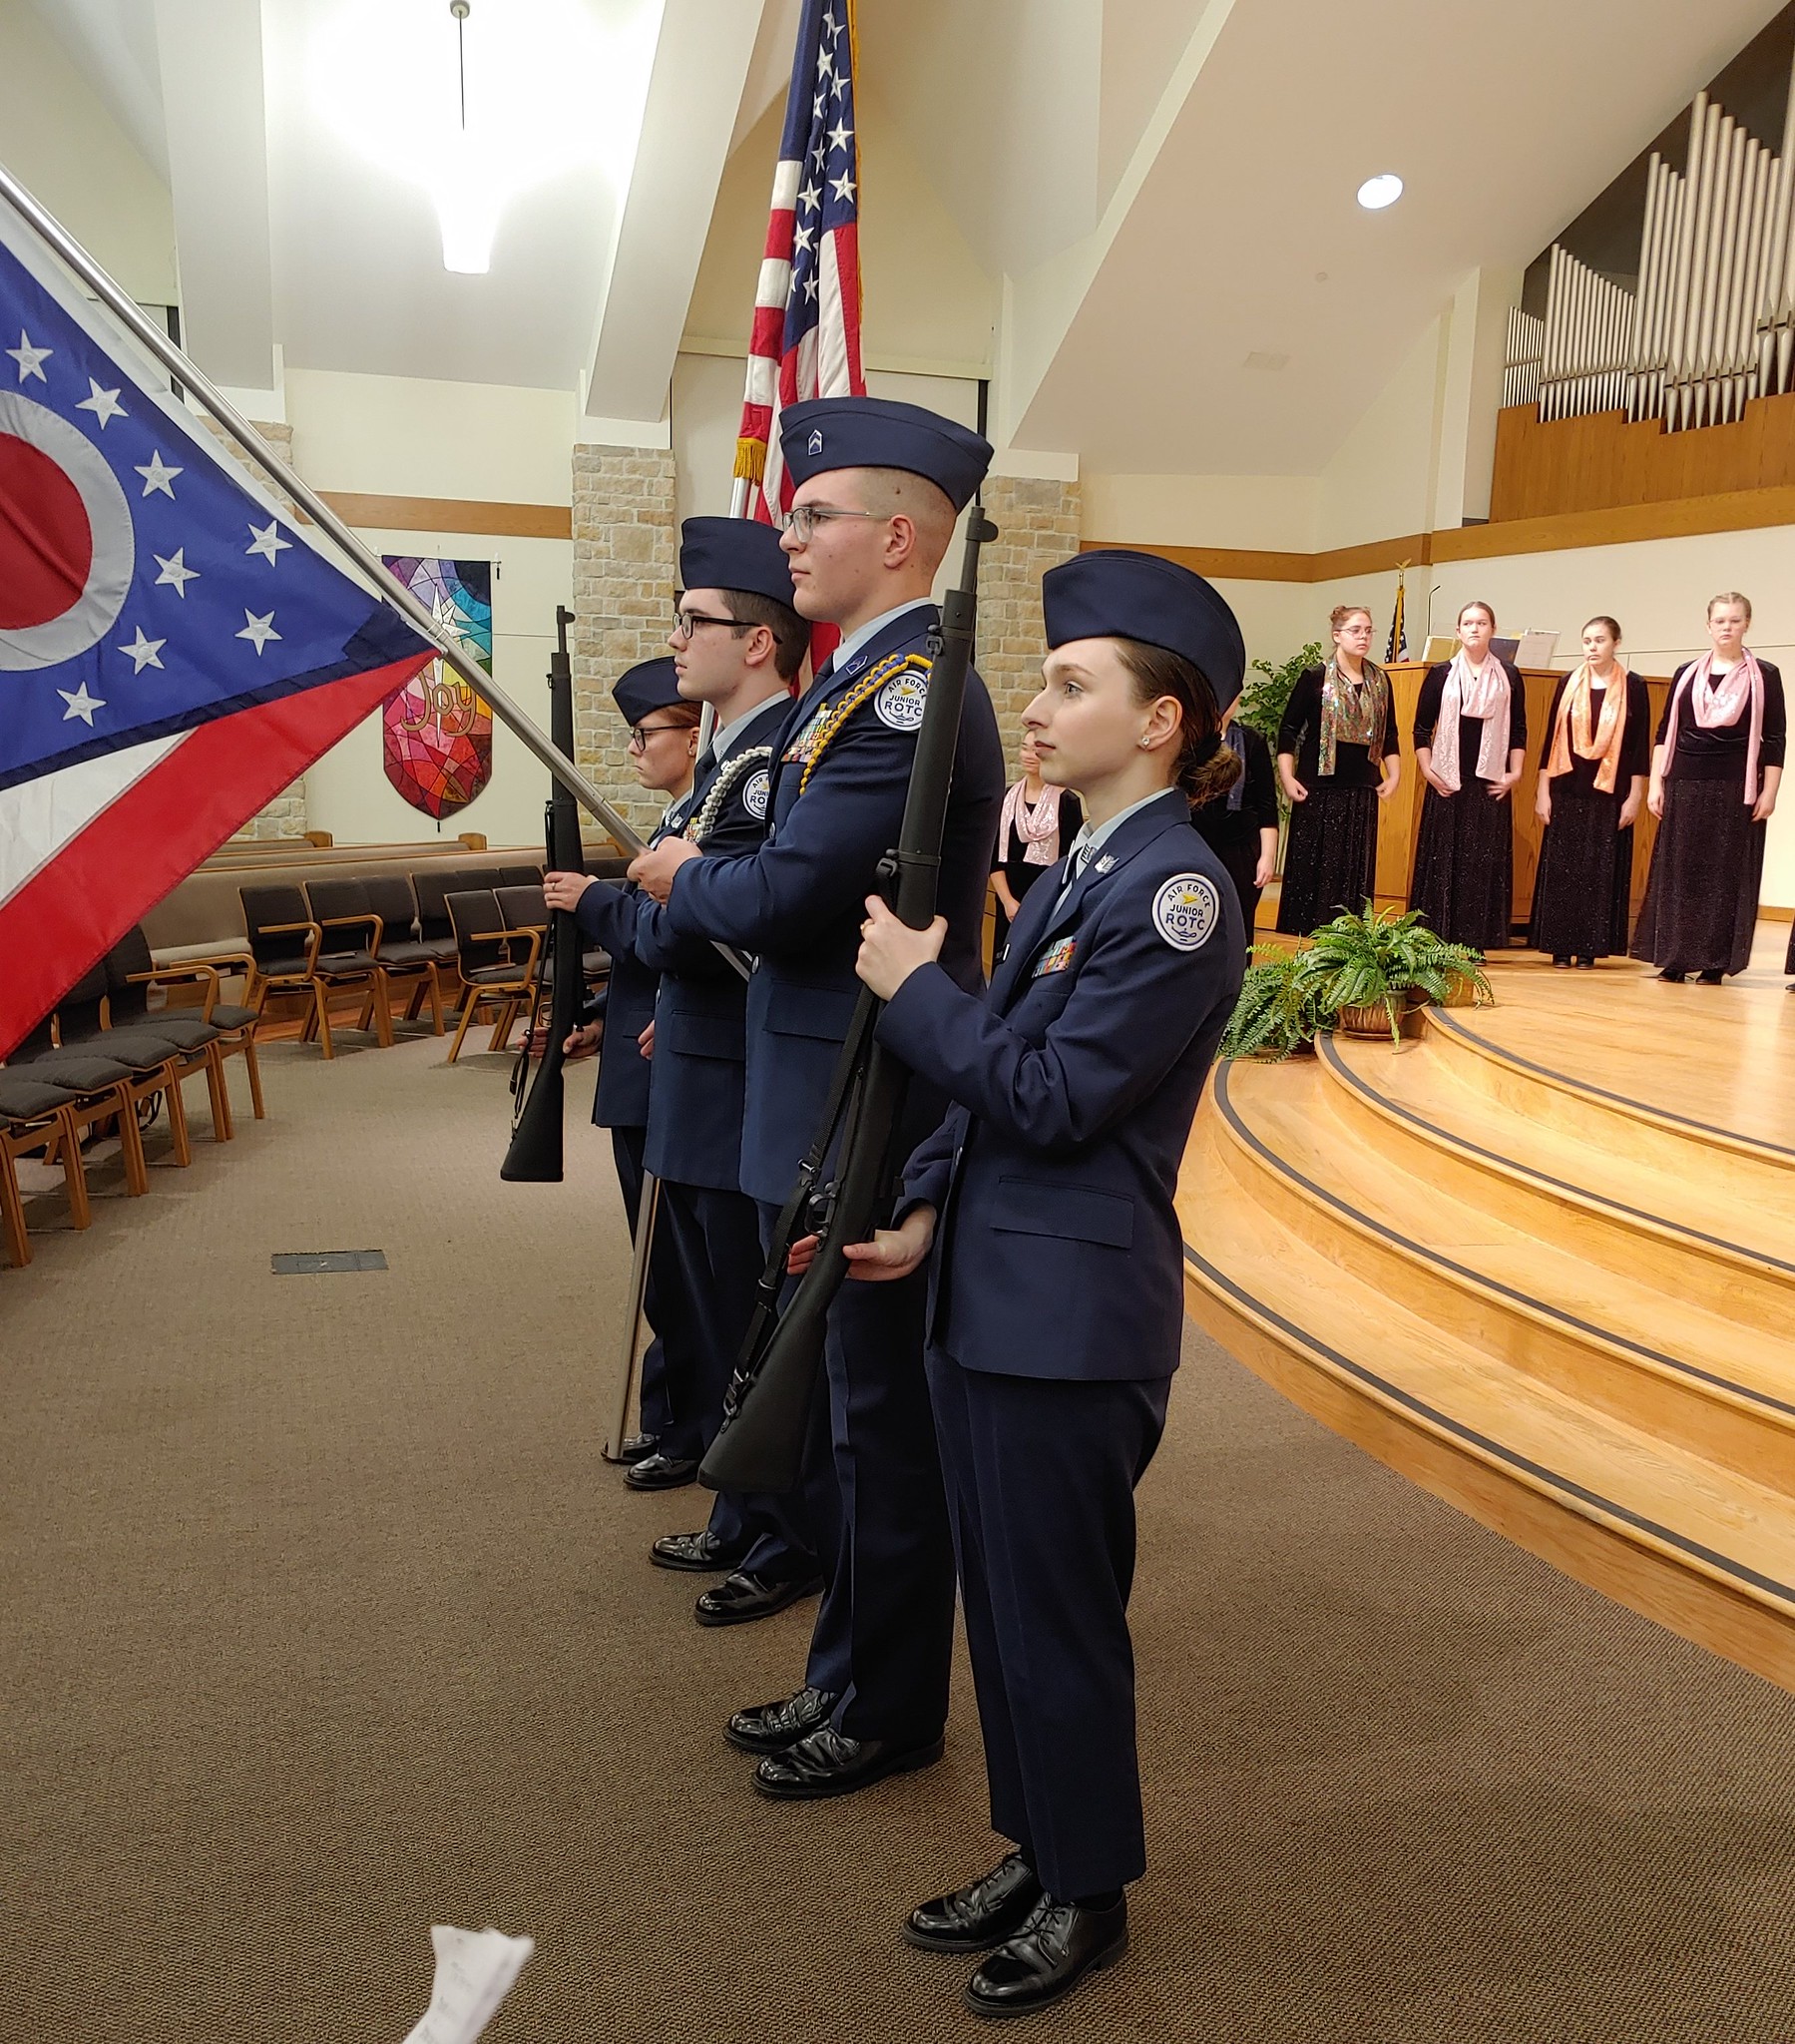 Young people in uniform holding flags as part of a ceremony.